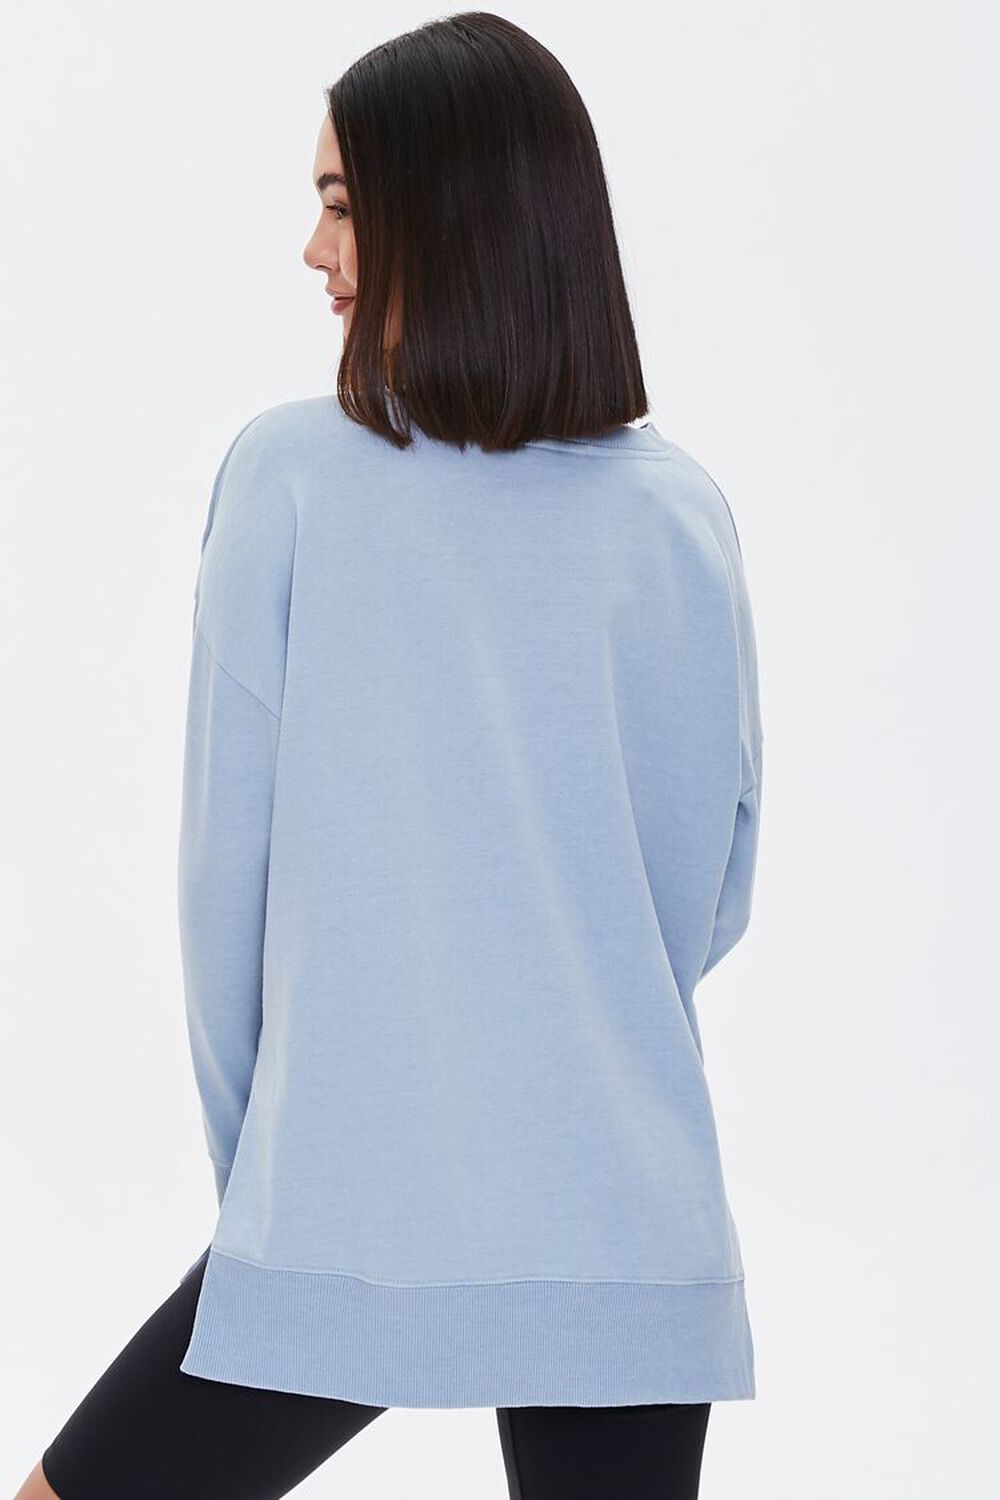 BLUE Embroidered Love Pullover, image 3